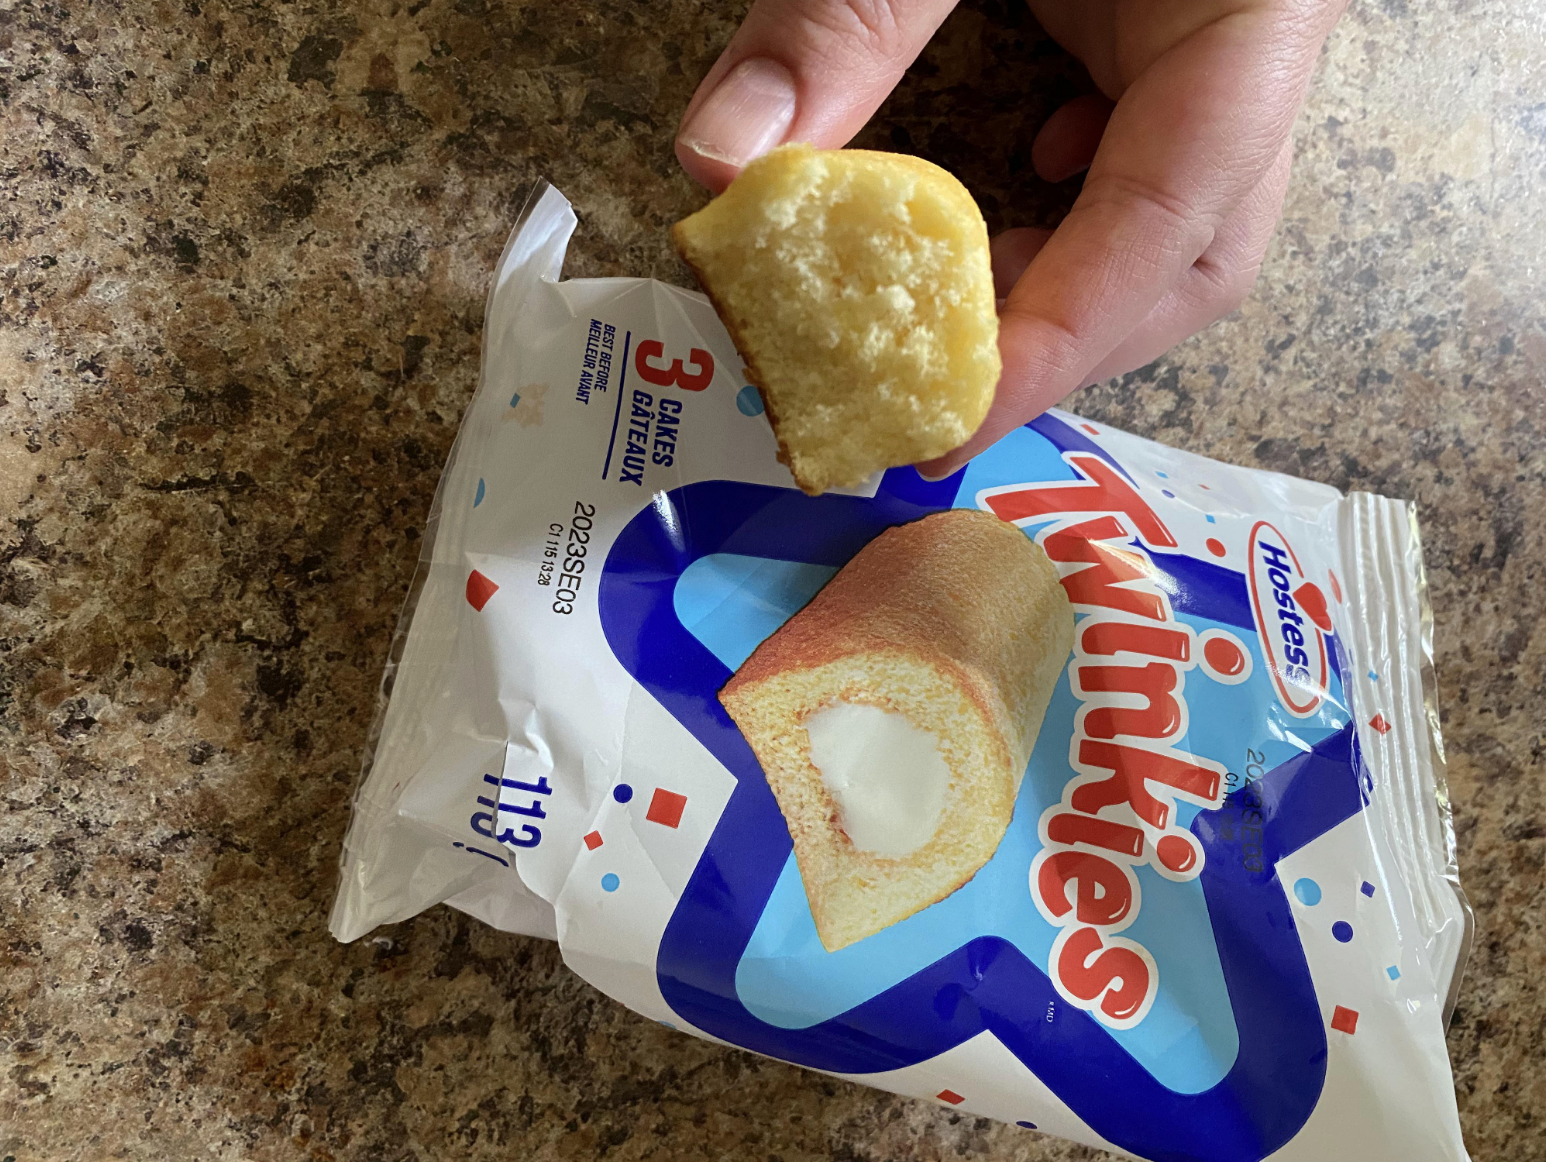 Person holding a bitten Twinkie over an open Twinkies snack package